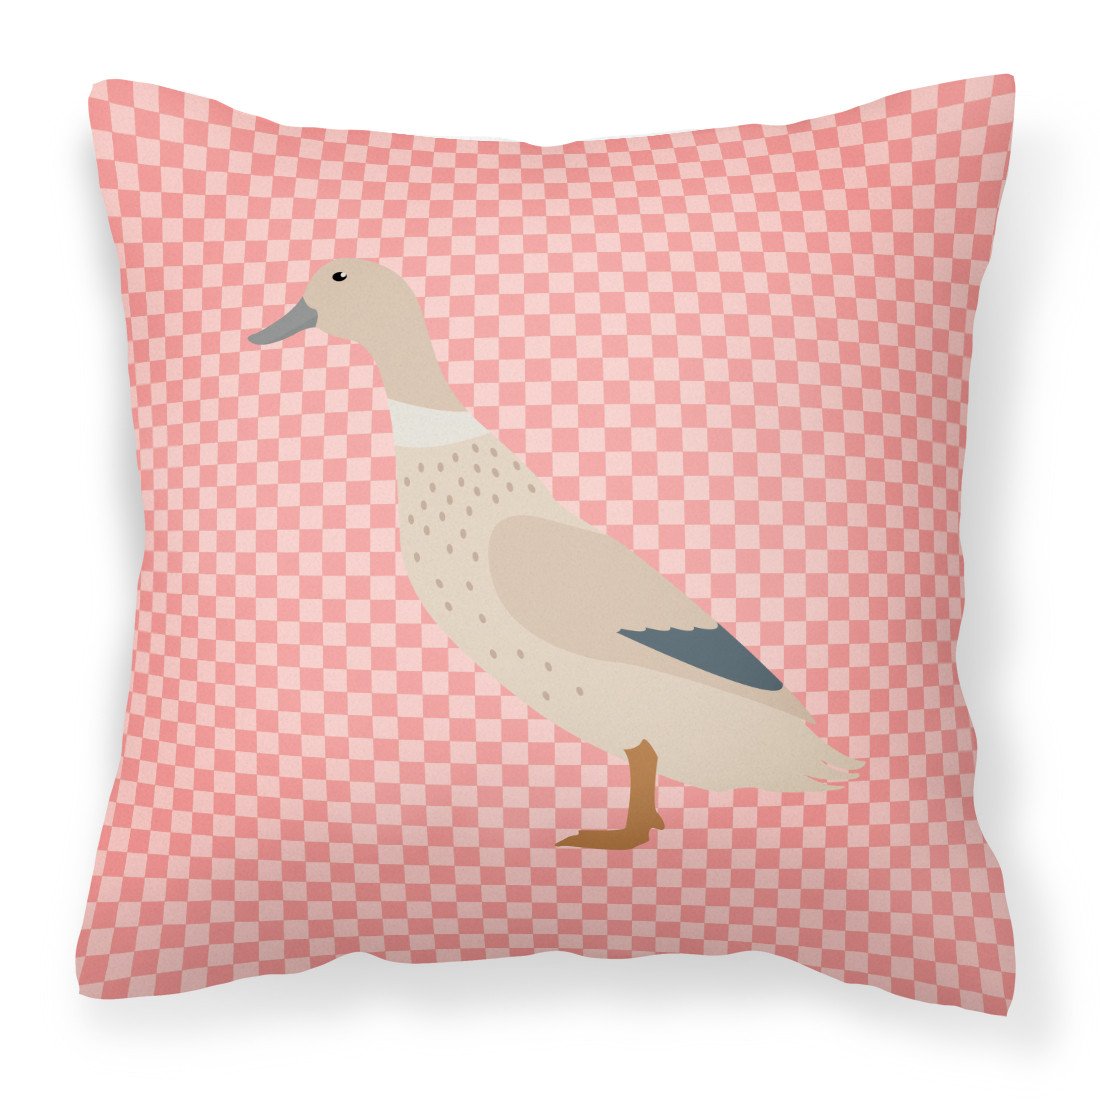 West Harlequin Duck Pink Check Fabric Decorative Pillow BB7858PW1818 by Caroline's Treasures